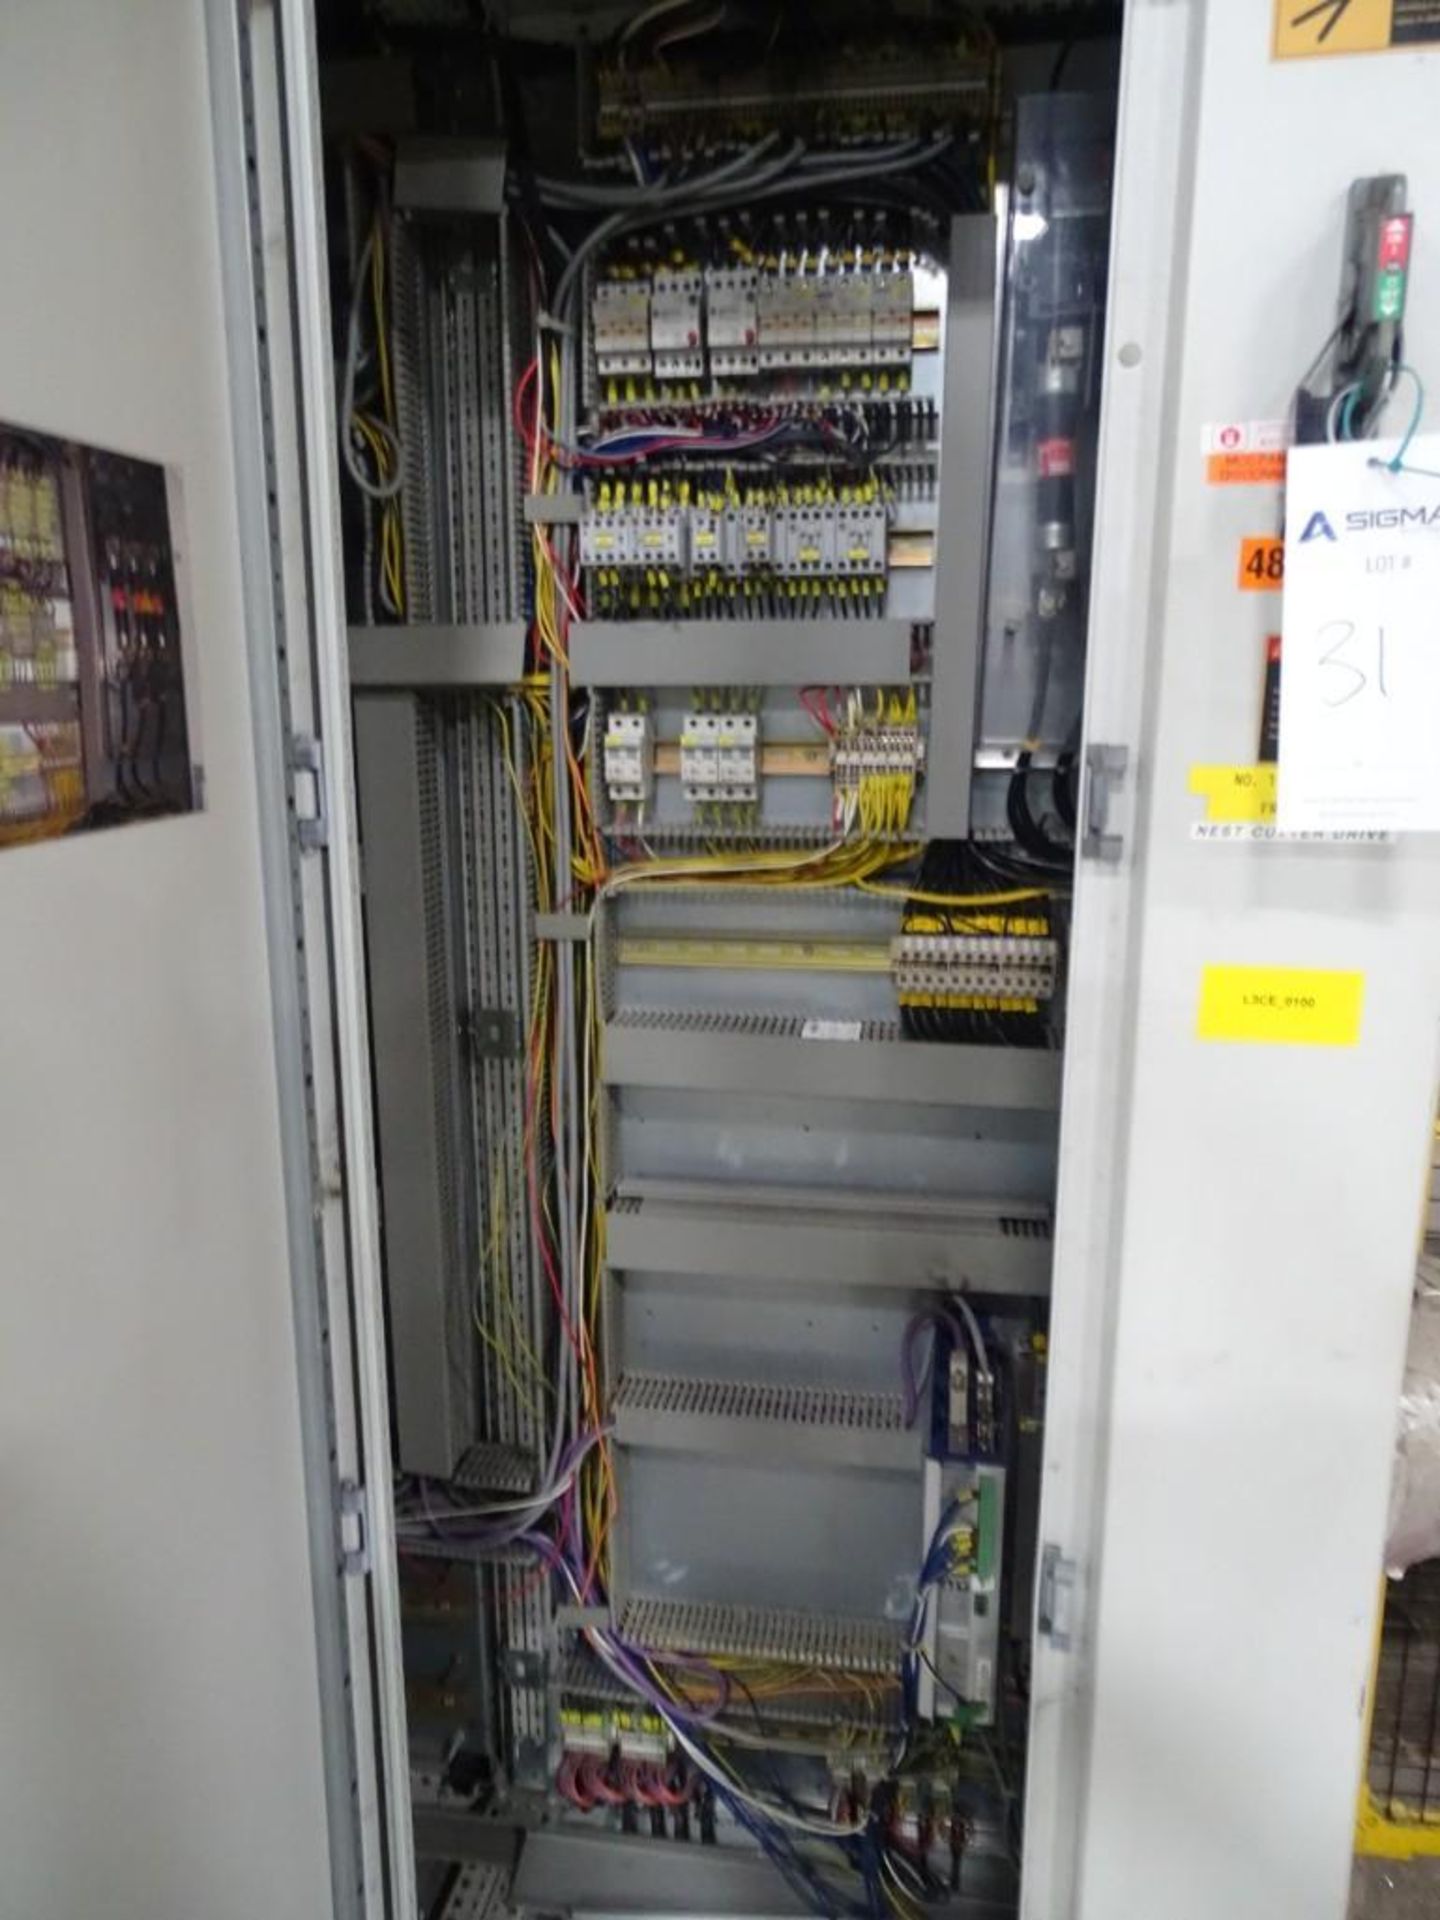 Control Panel with Contents - Allen-Bradley PowerFlex Drives - Image 2 of 6